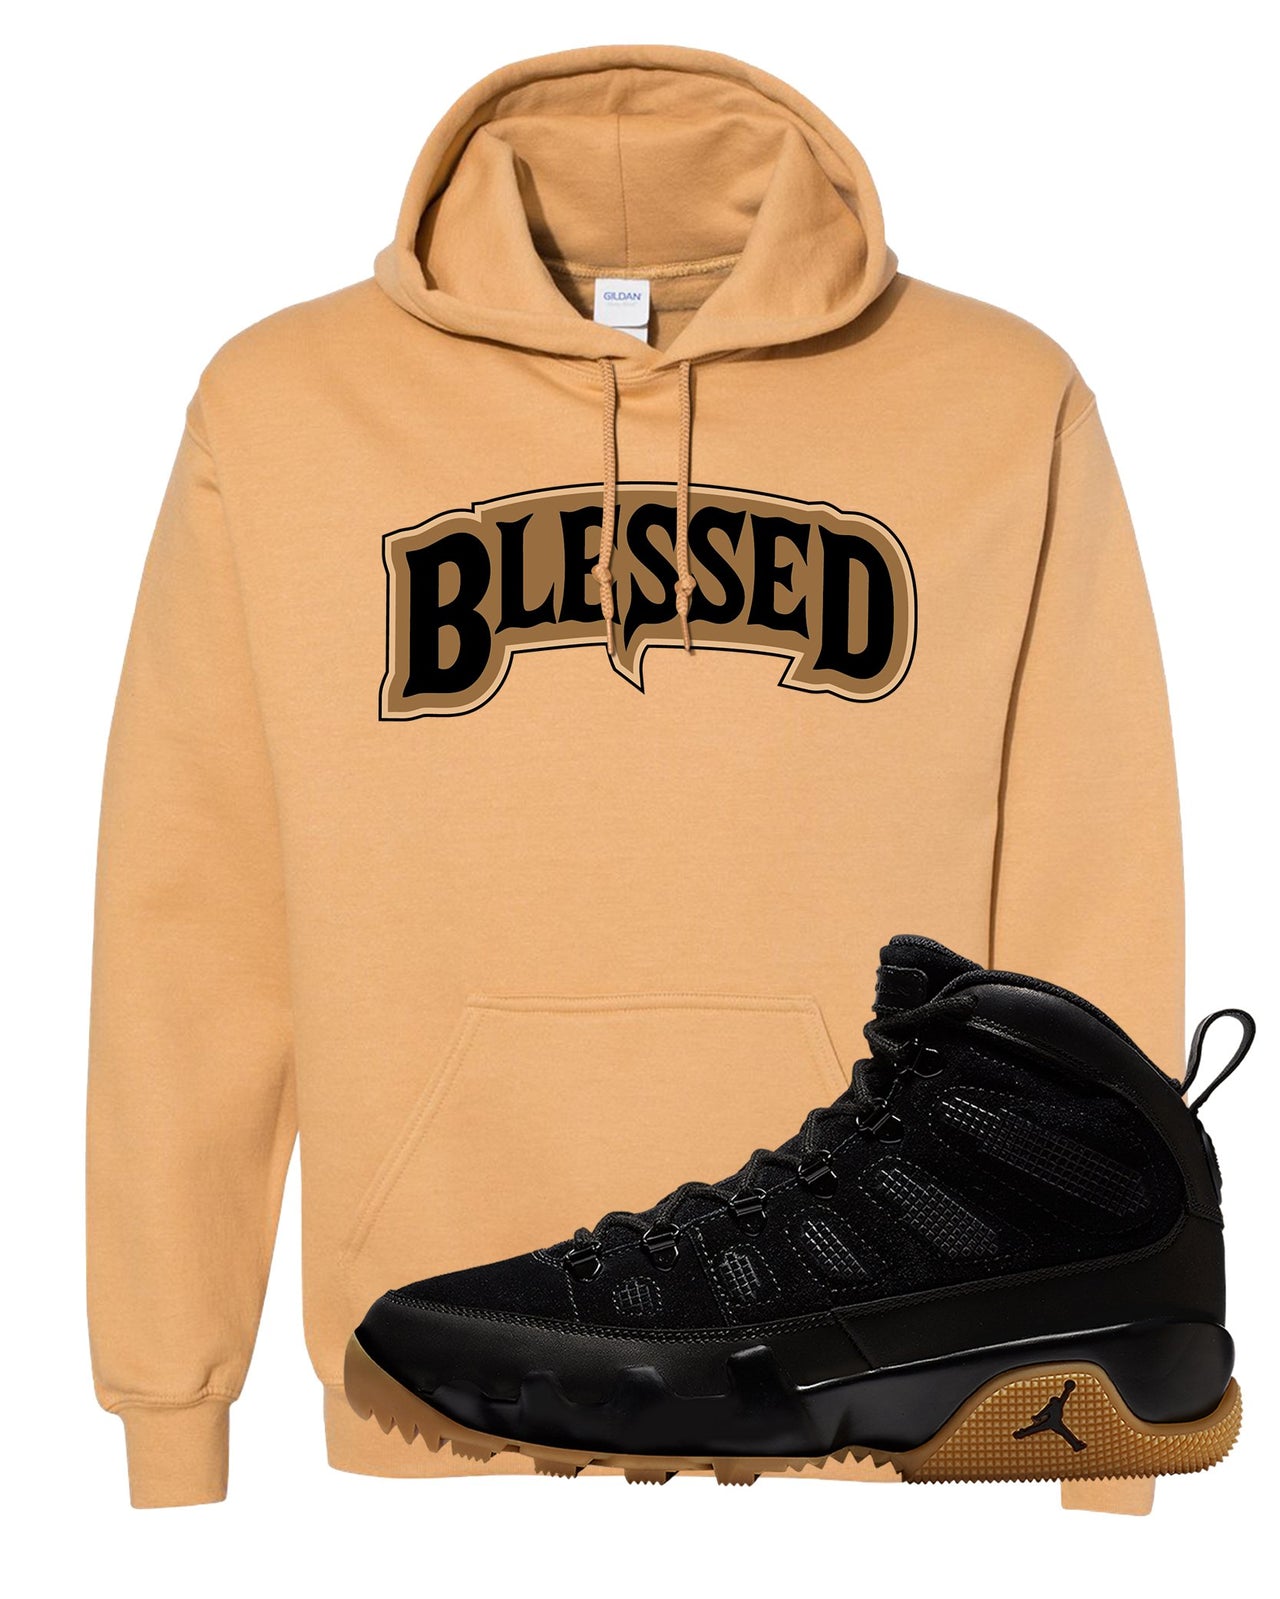 NRG Black Gum Boot 9s Hoodie | Blessed Arch, Old Gold